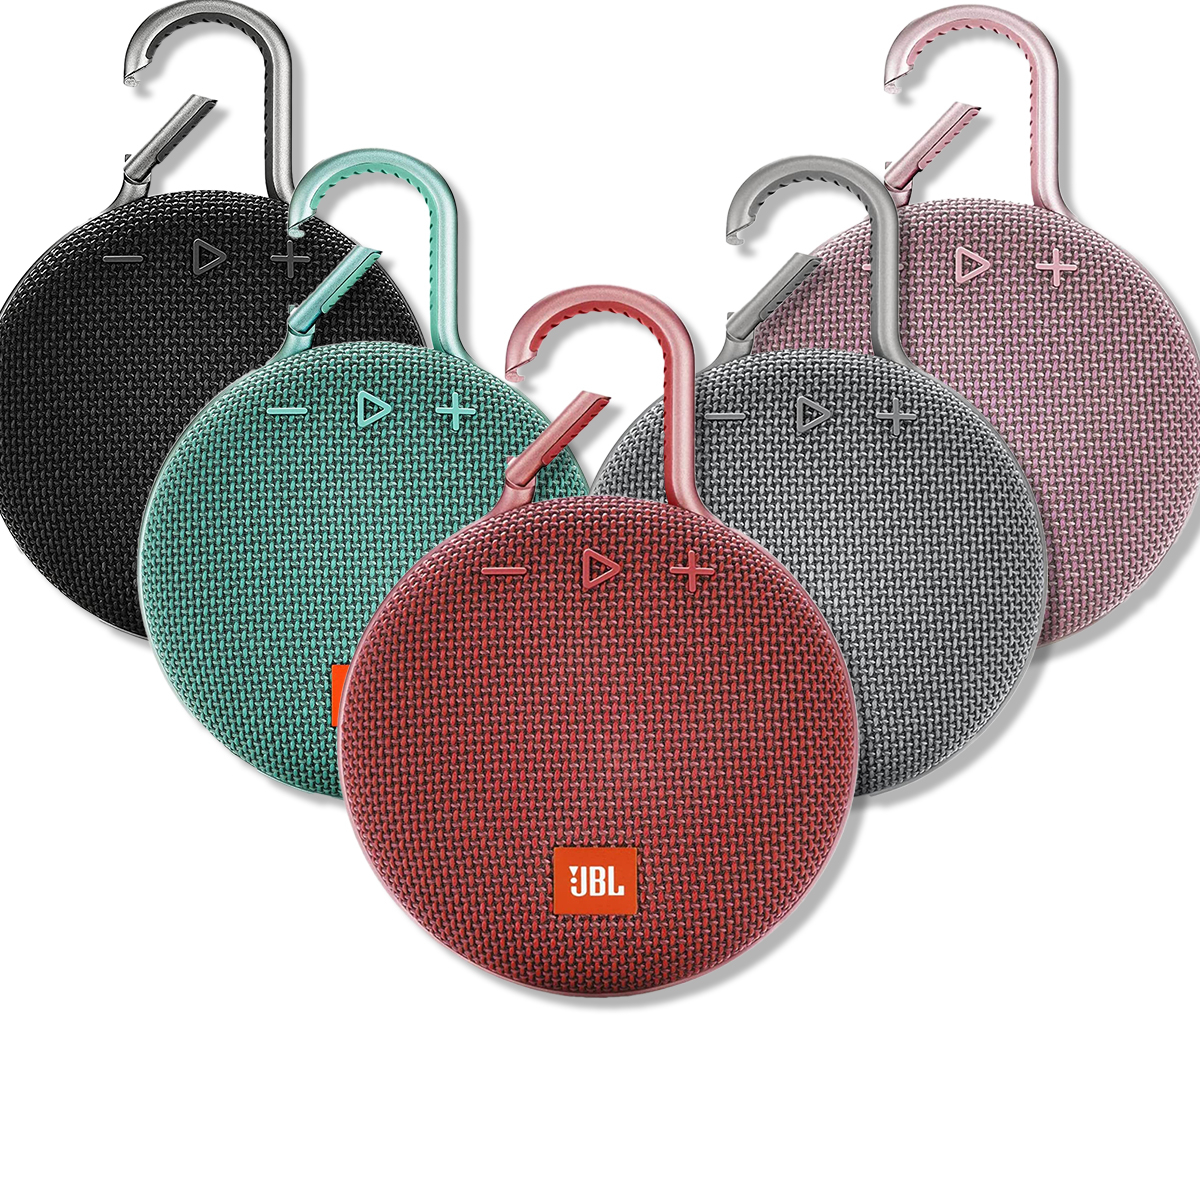 JBL Clip 3 Waterproof Speaker is Discounted, Now Just $39.95 Only in Color  of Your Choice